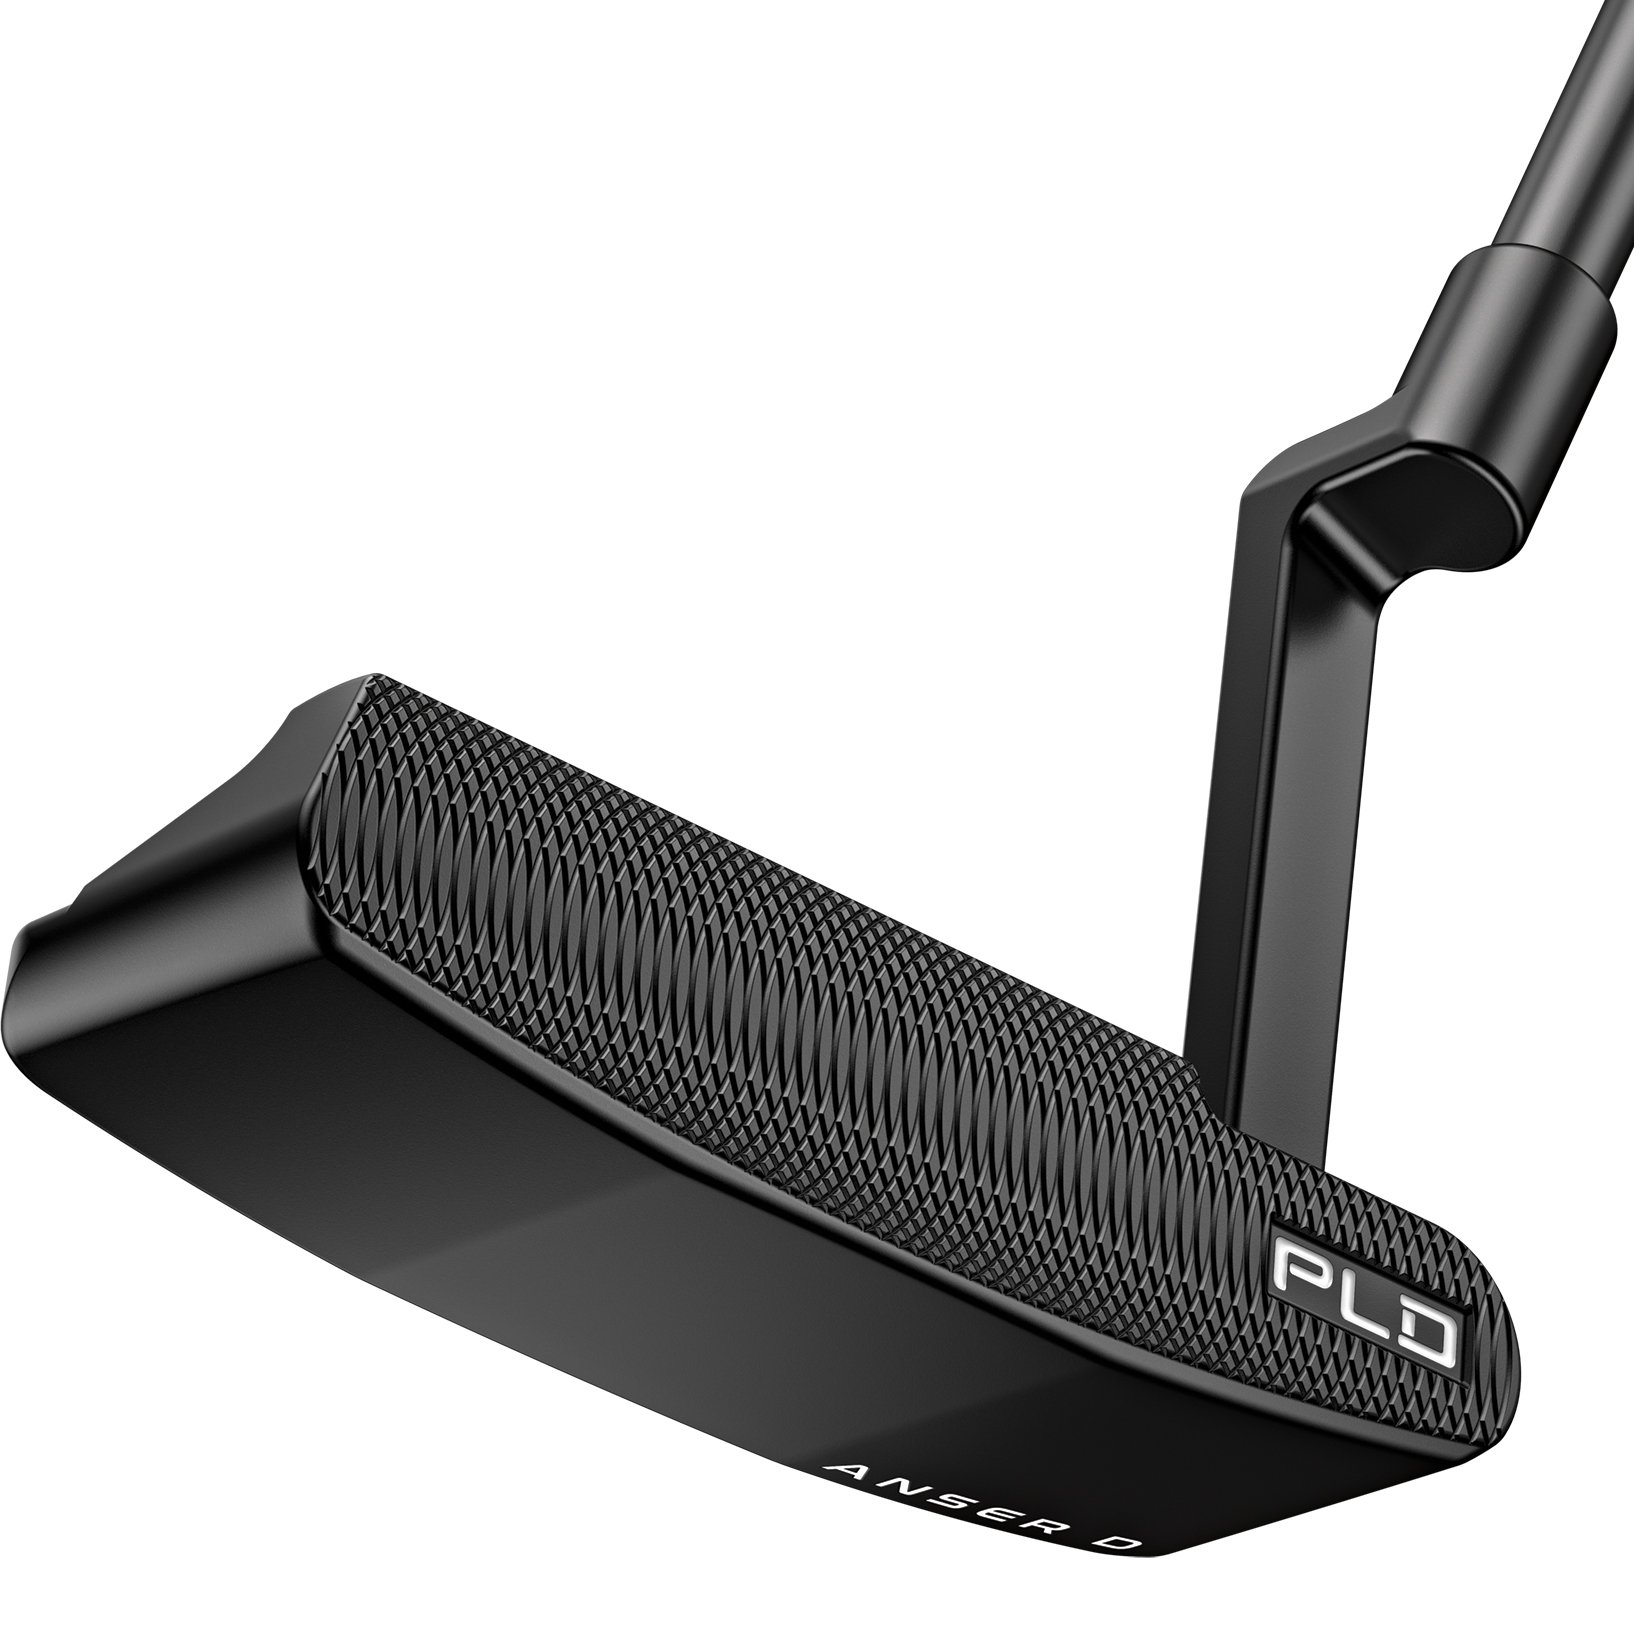 PING Men's Pld Milled Putter Graphite Shaft in Black | Right | Size 35 -  4472167